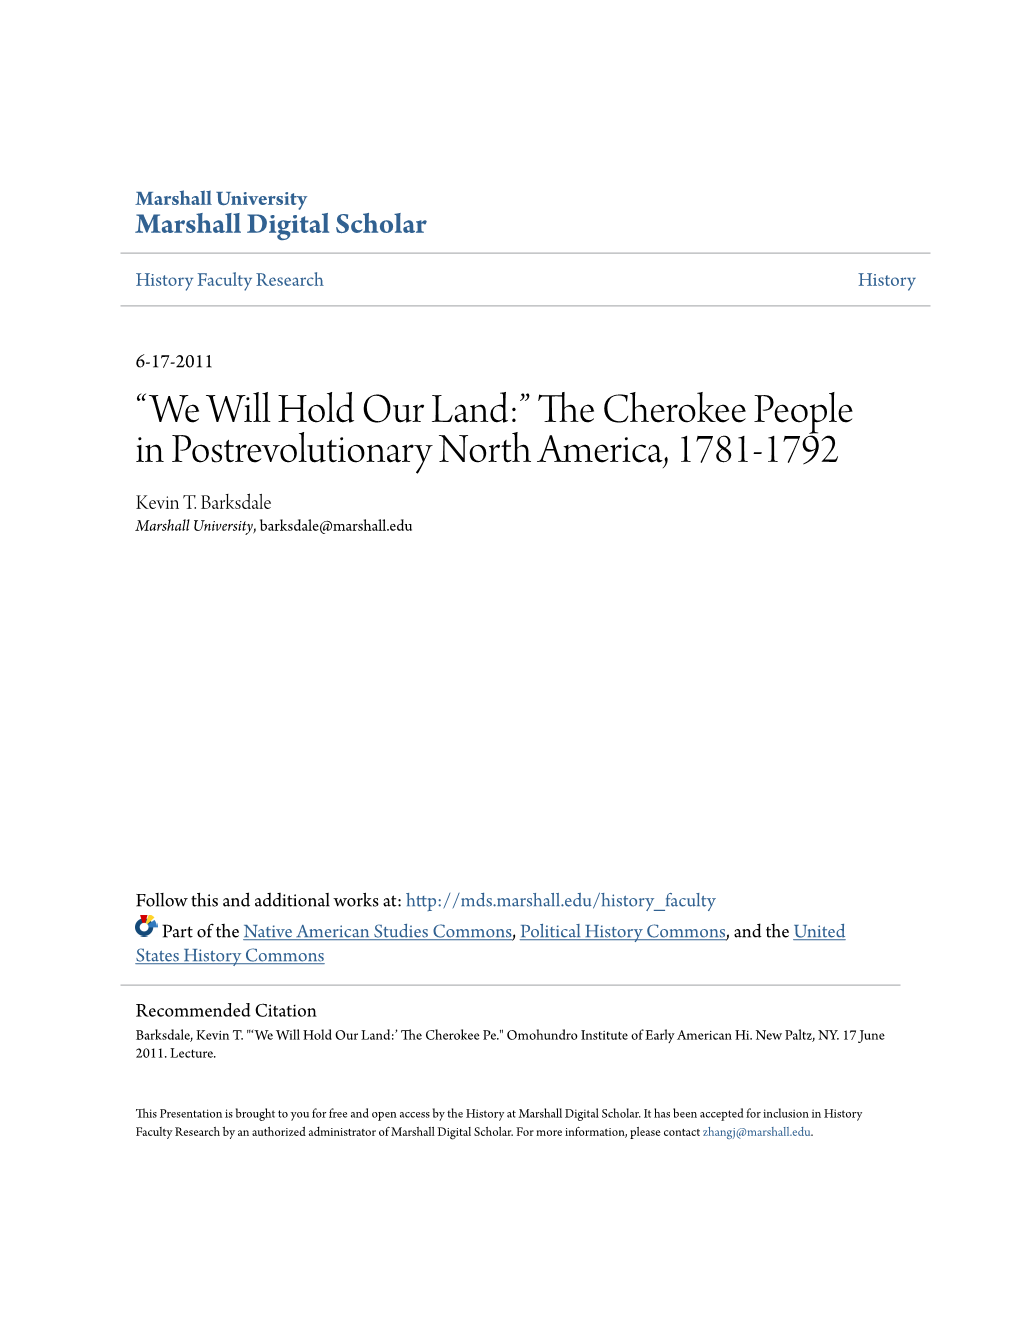 The Cherokee People in Postrevolutionary North America, 1781-1792